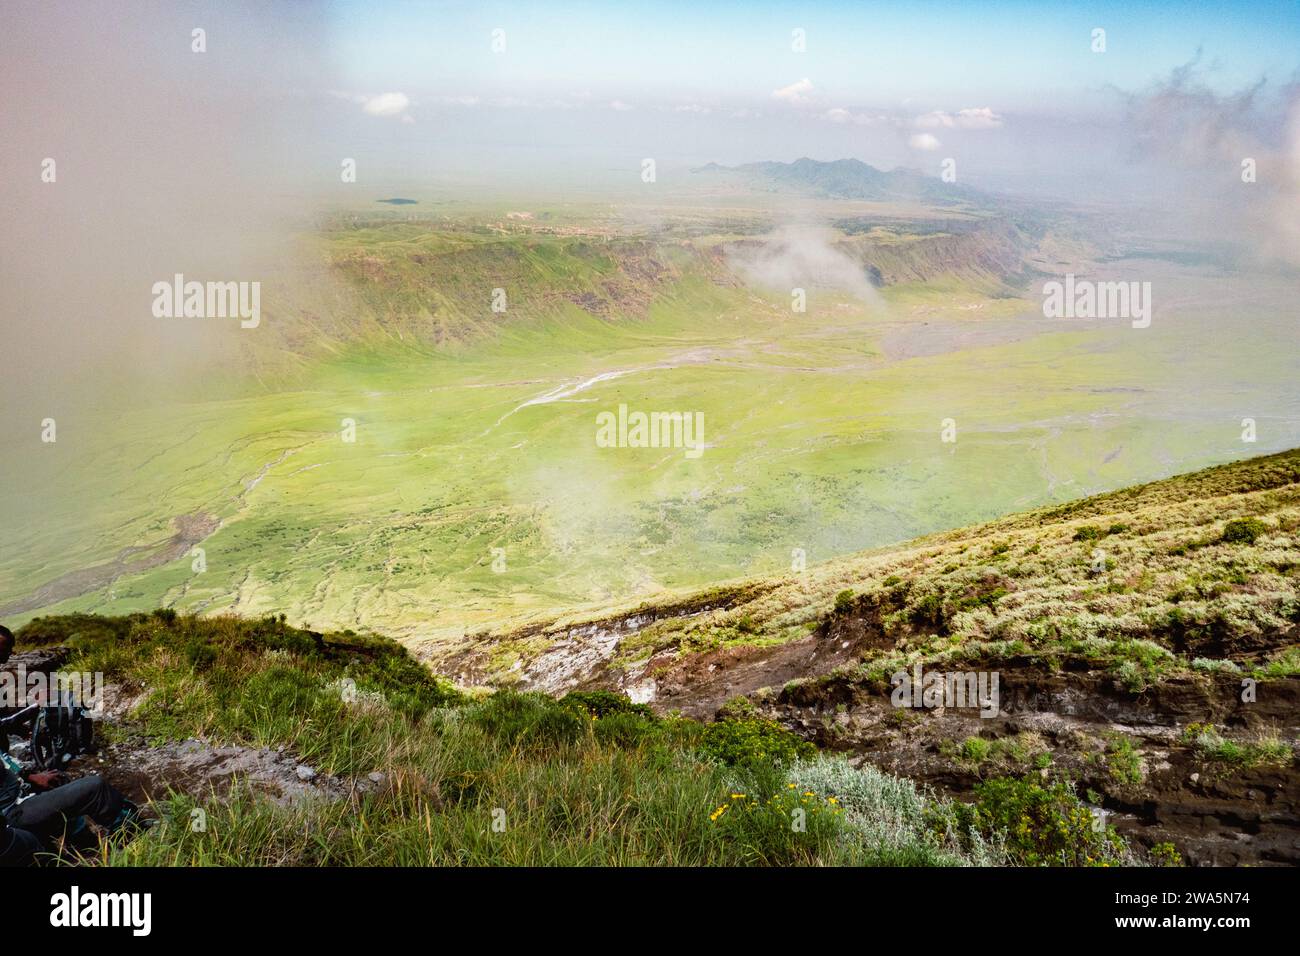 View of volcanic rock formations in Rift Valley seen from Mount Ol Doinyo Lengai in Tanzania Stock Photo